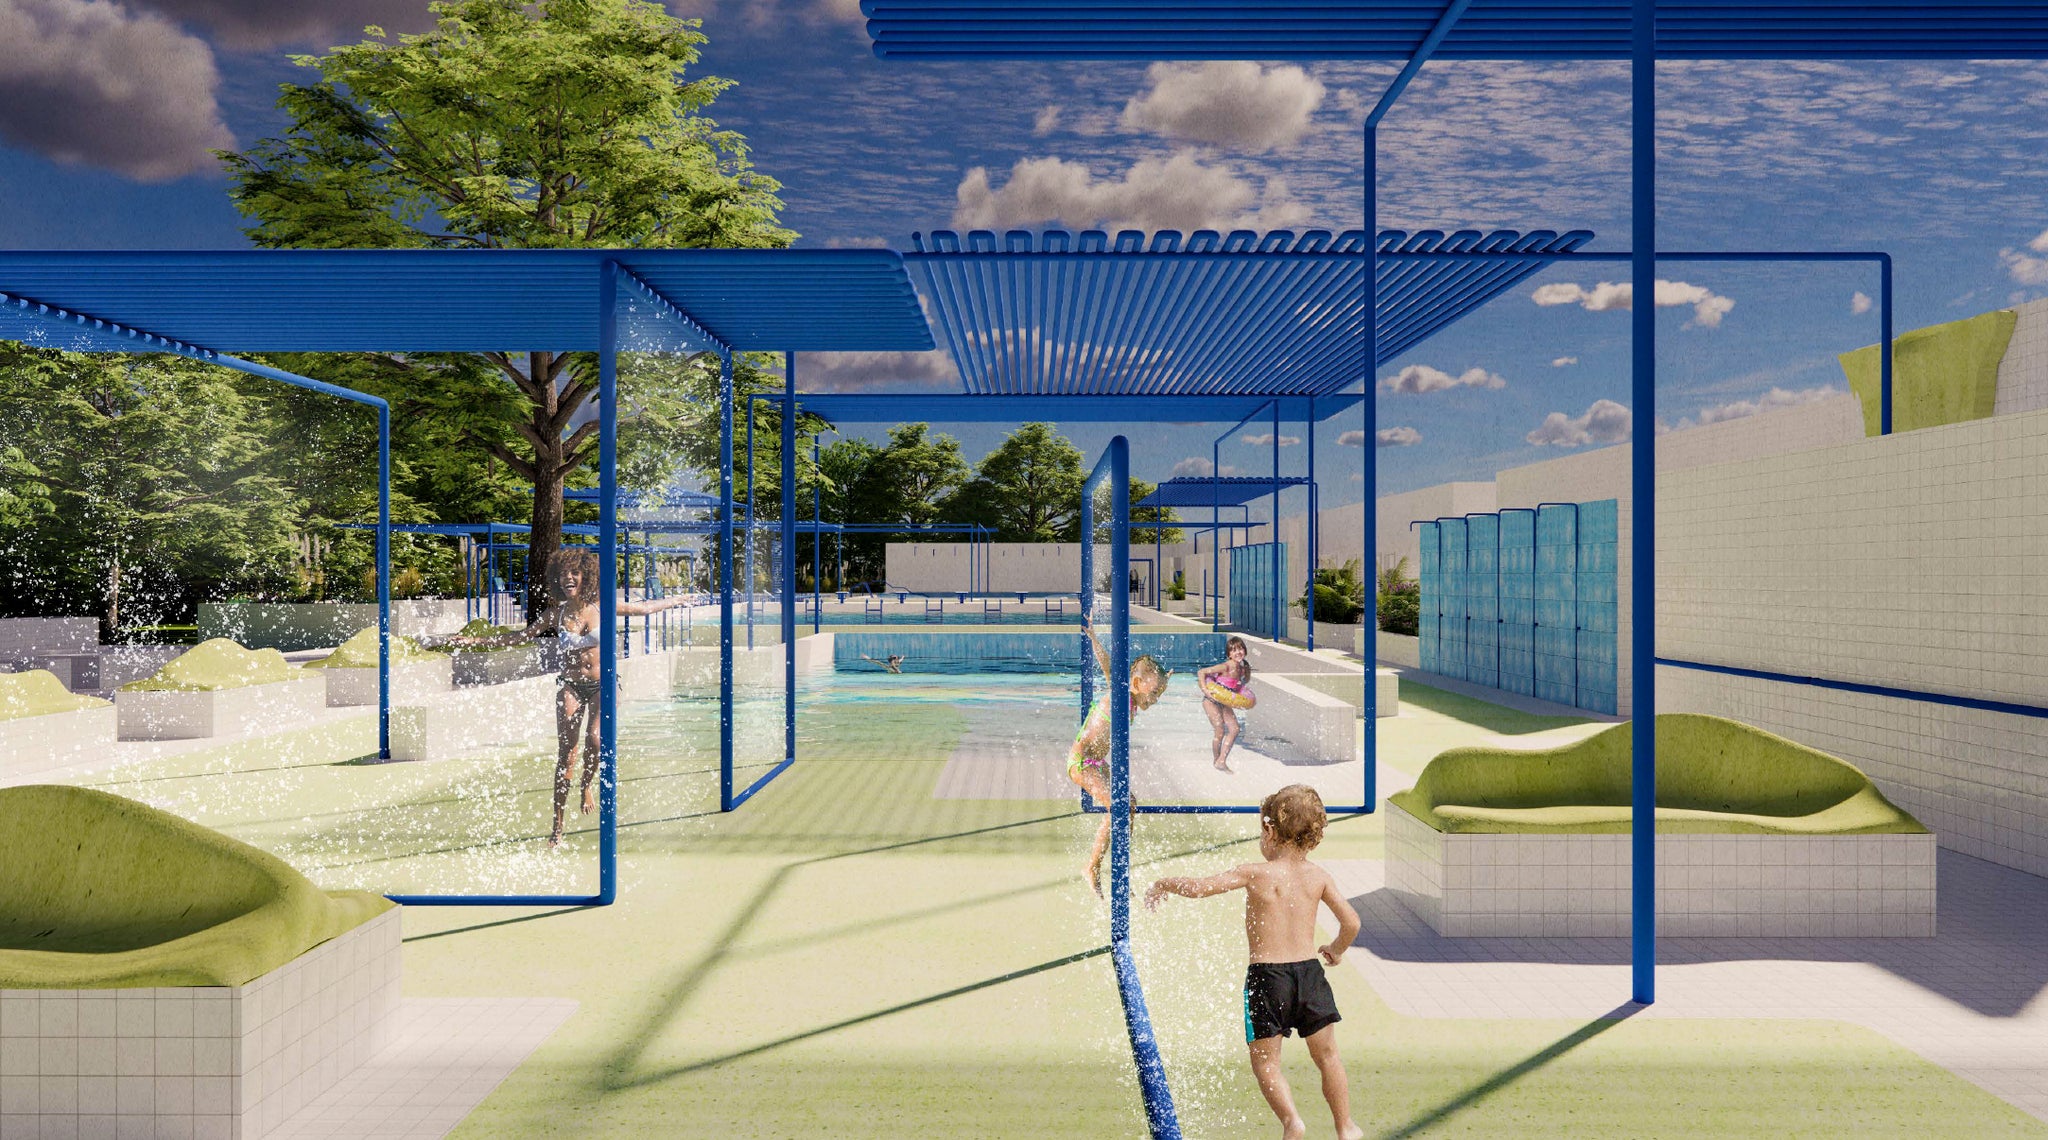 Rendering of a possible public pool in Austin using clay imports tile